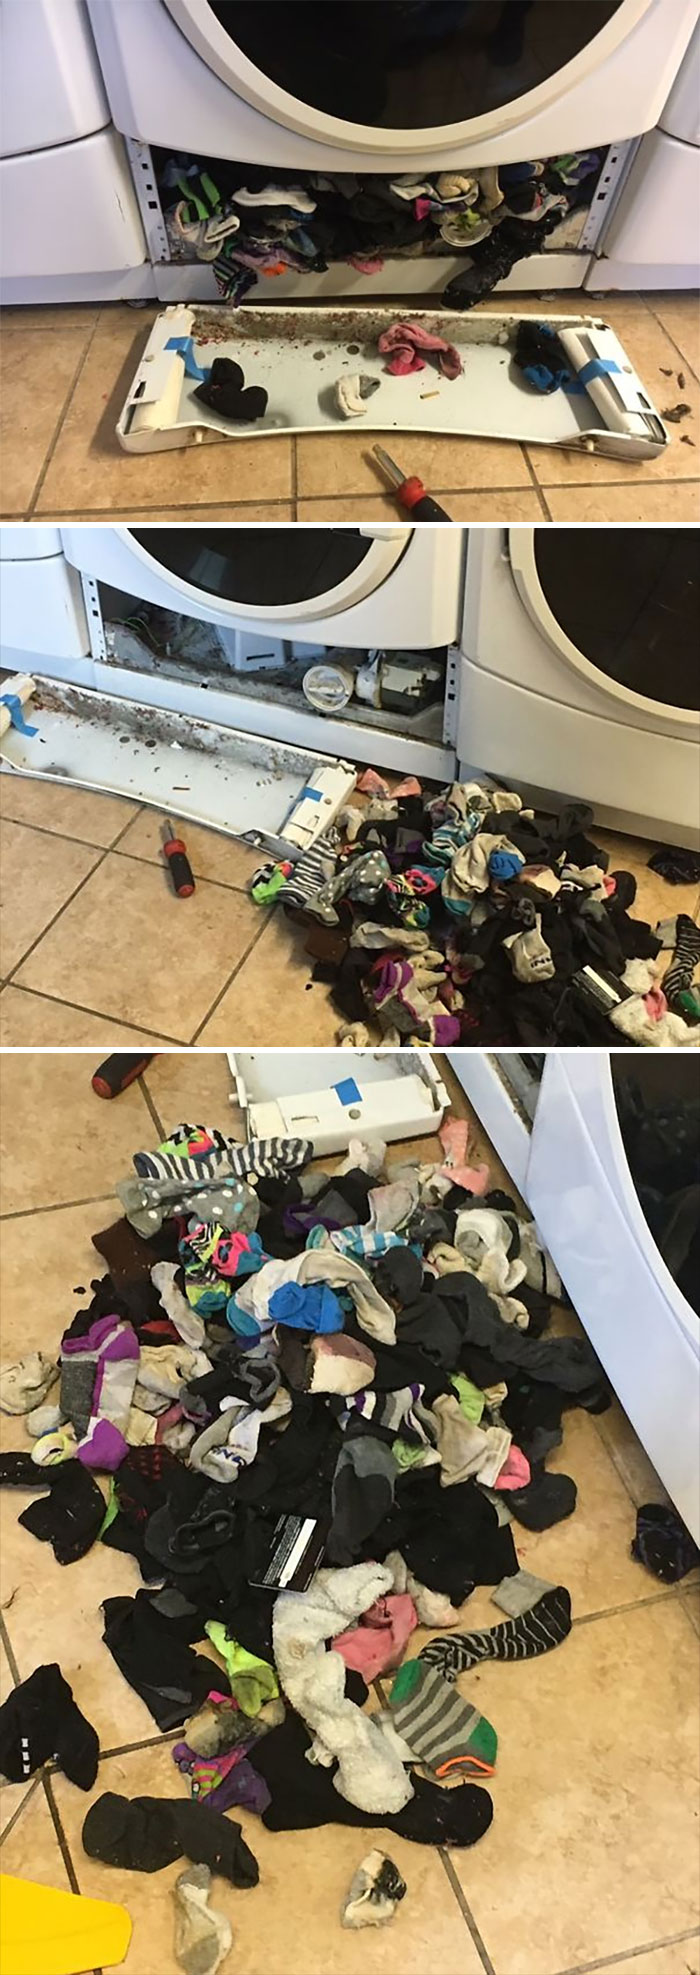 Turns Out Washing Machines Do Eat Socks, But There Were More Surprising Things That We Found